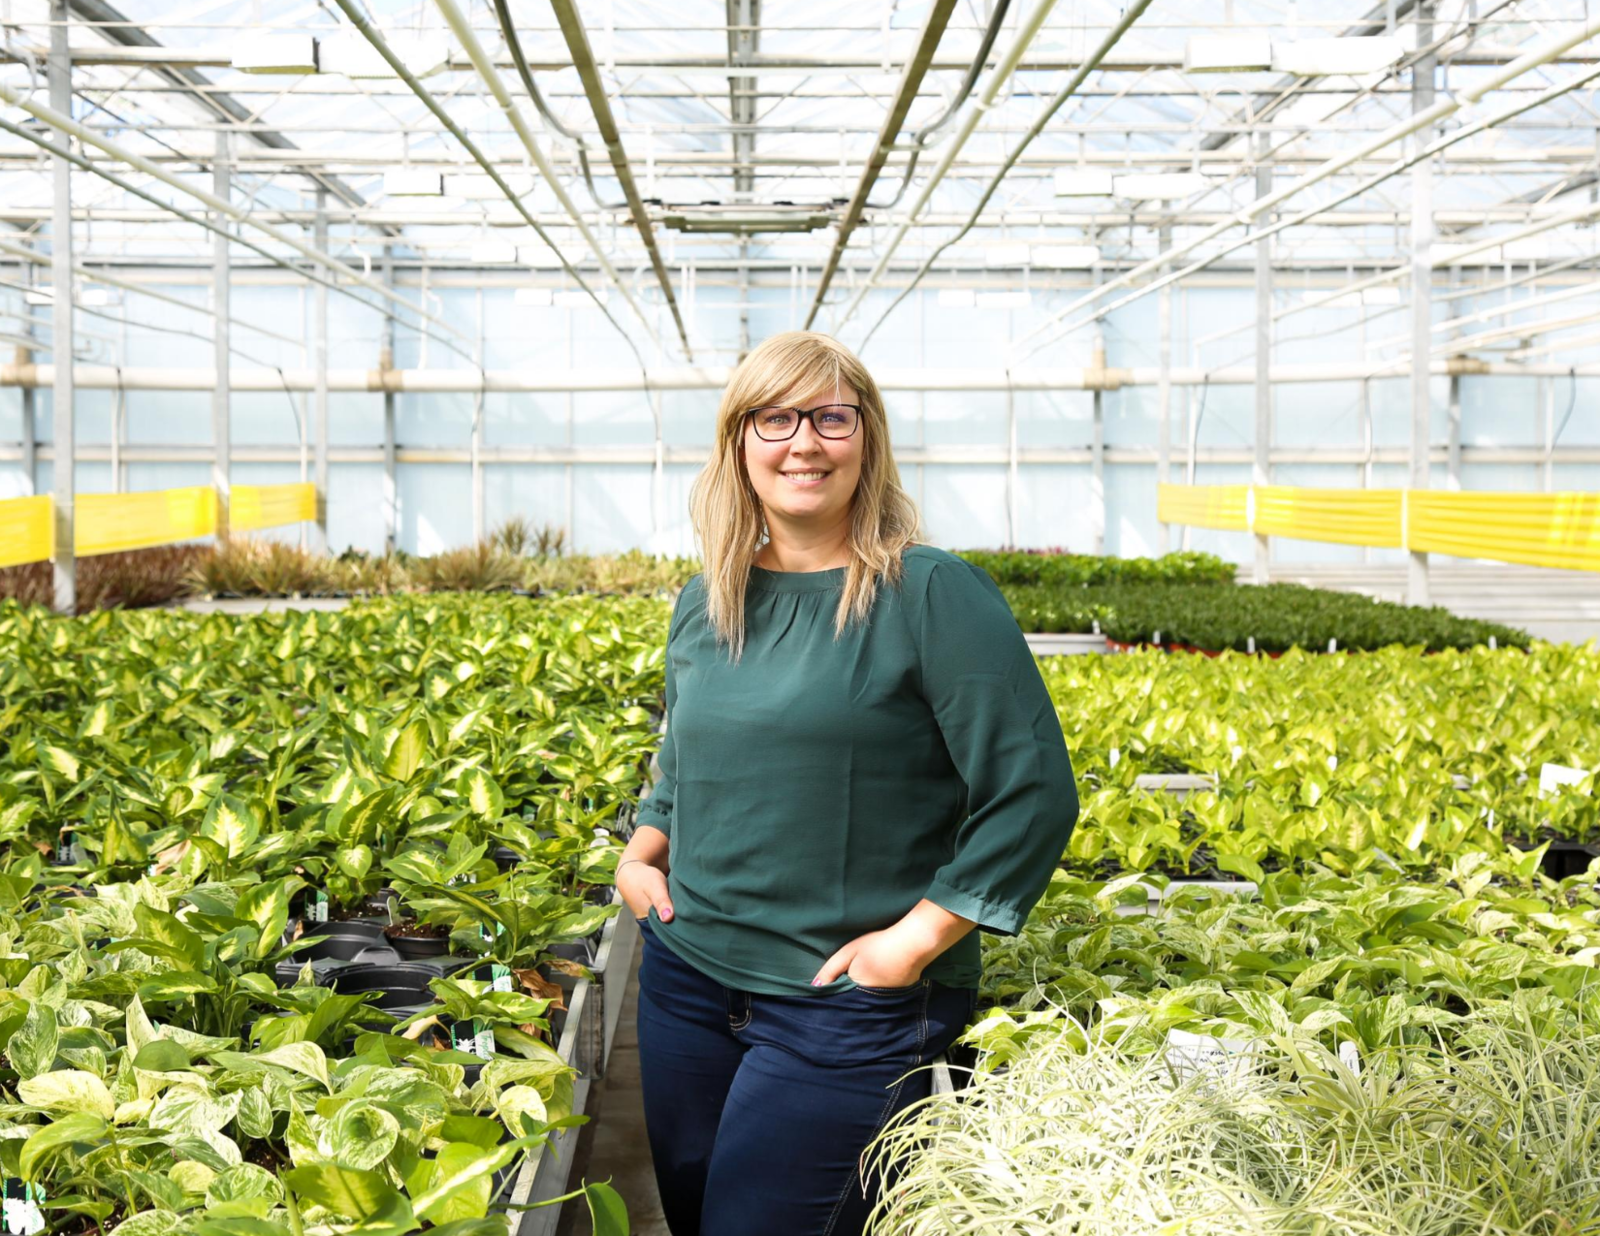 A blonde women in a turquoise shirt in the middle of a greenhouse filled with green plants.